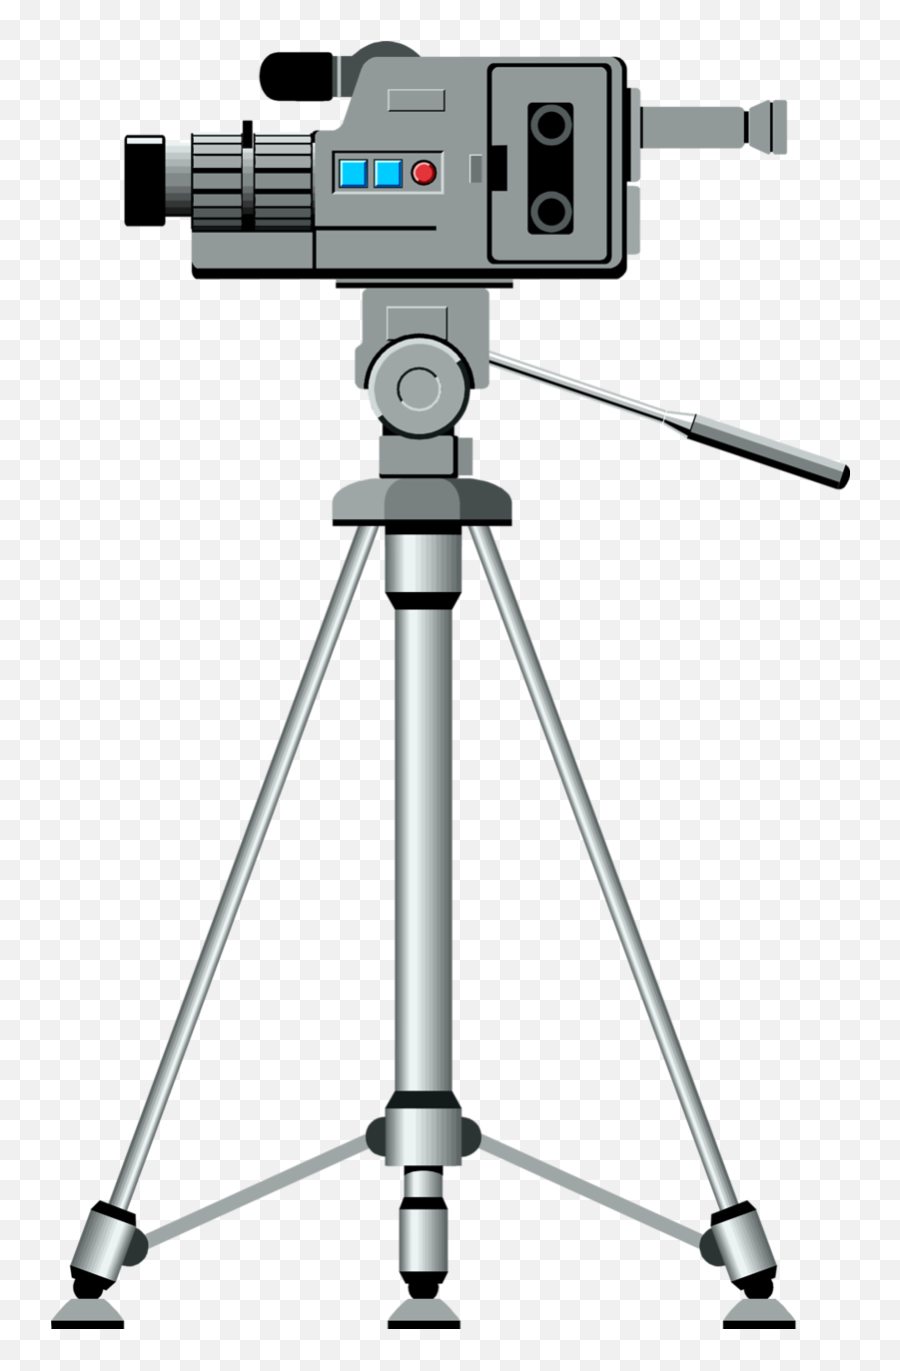 Download Free Png Video Camera Picture - Video Camera On Tripod Emoji,Video Camera Emoji